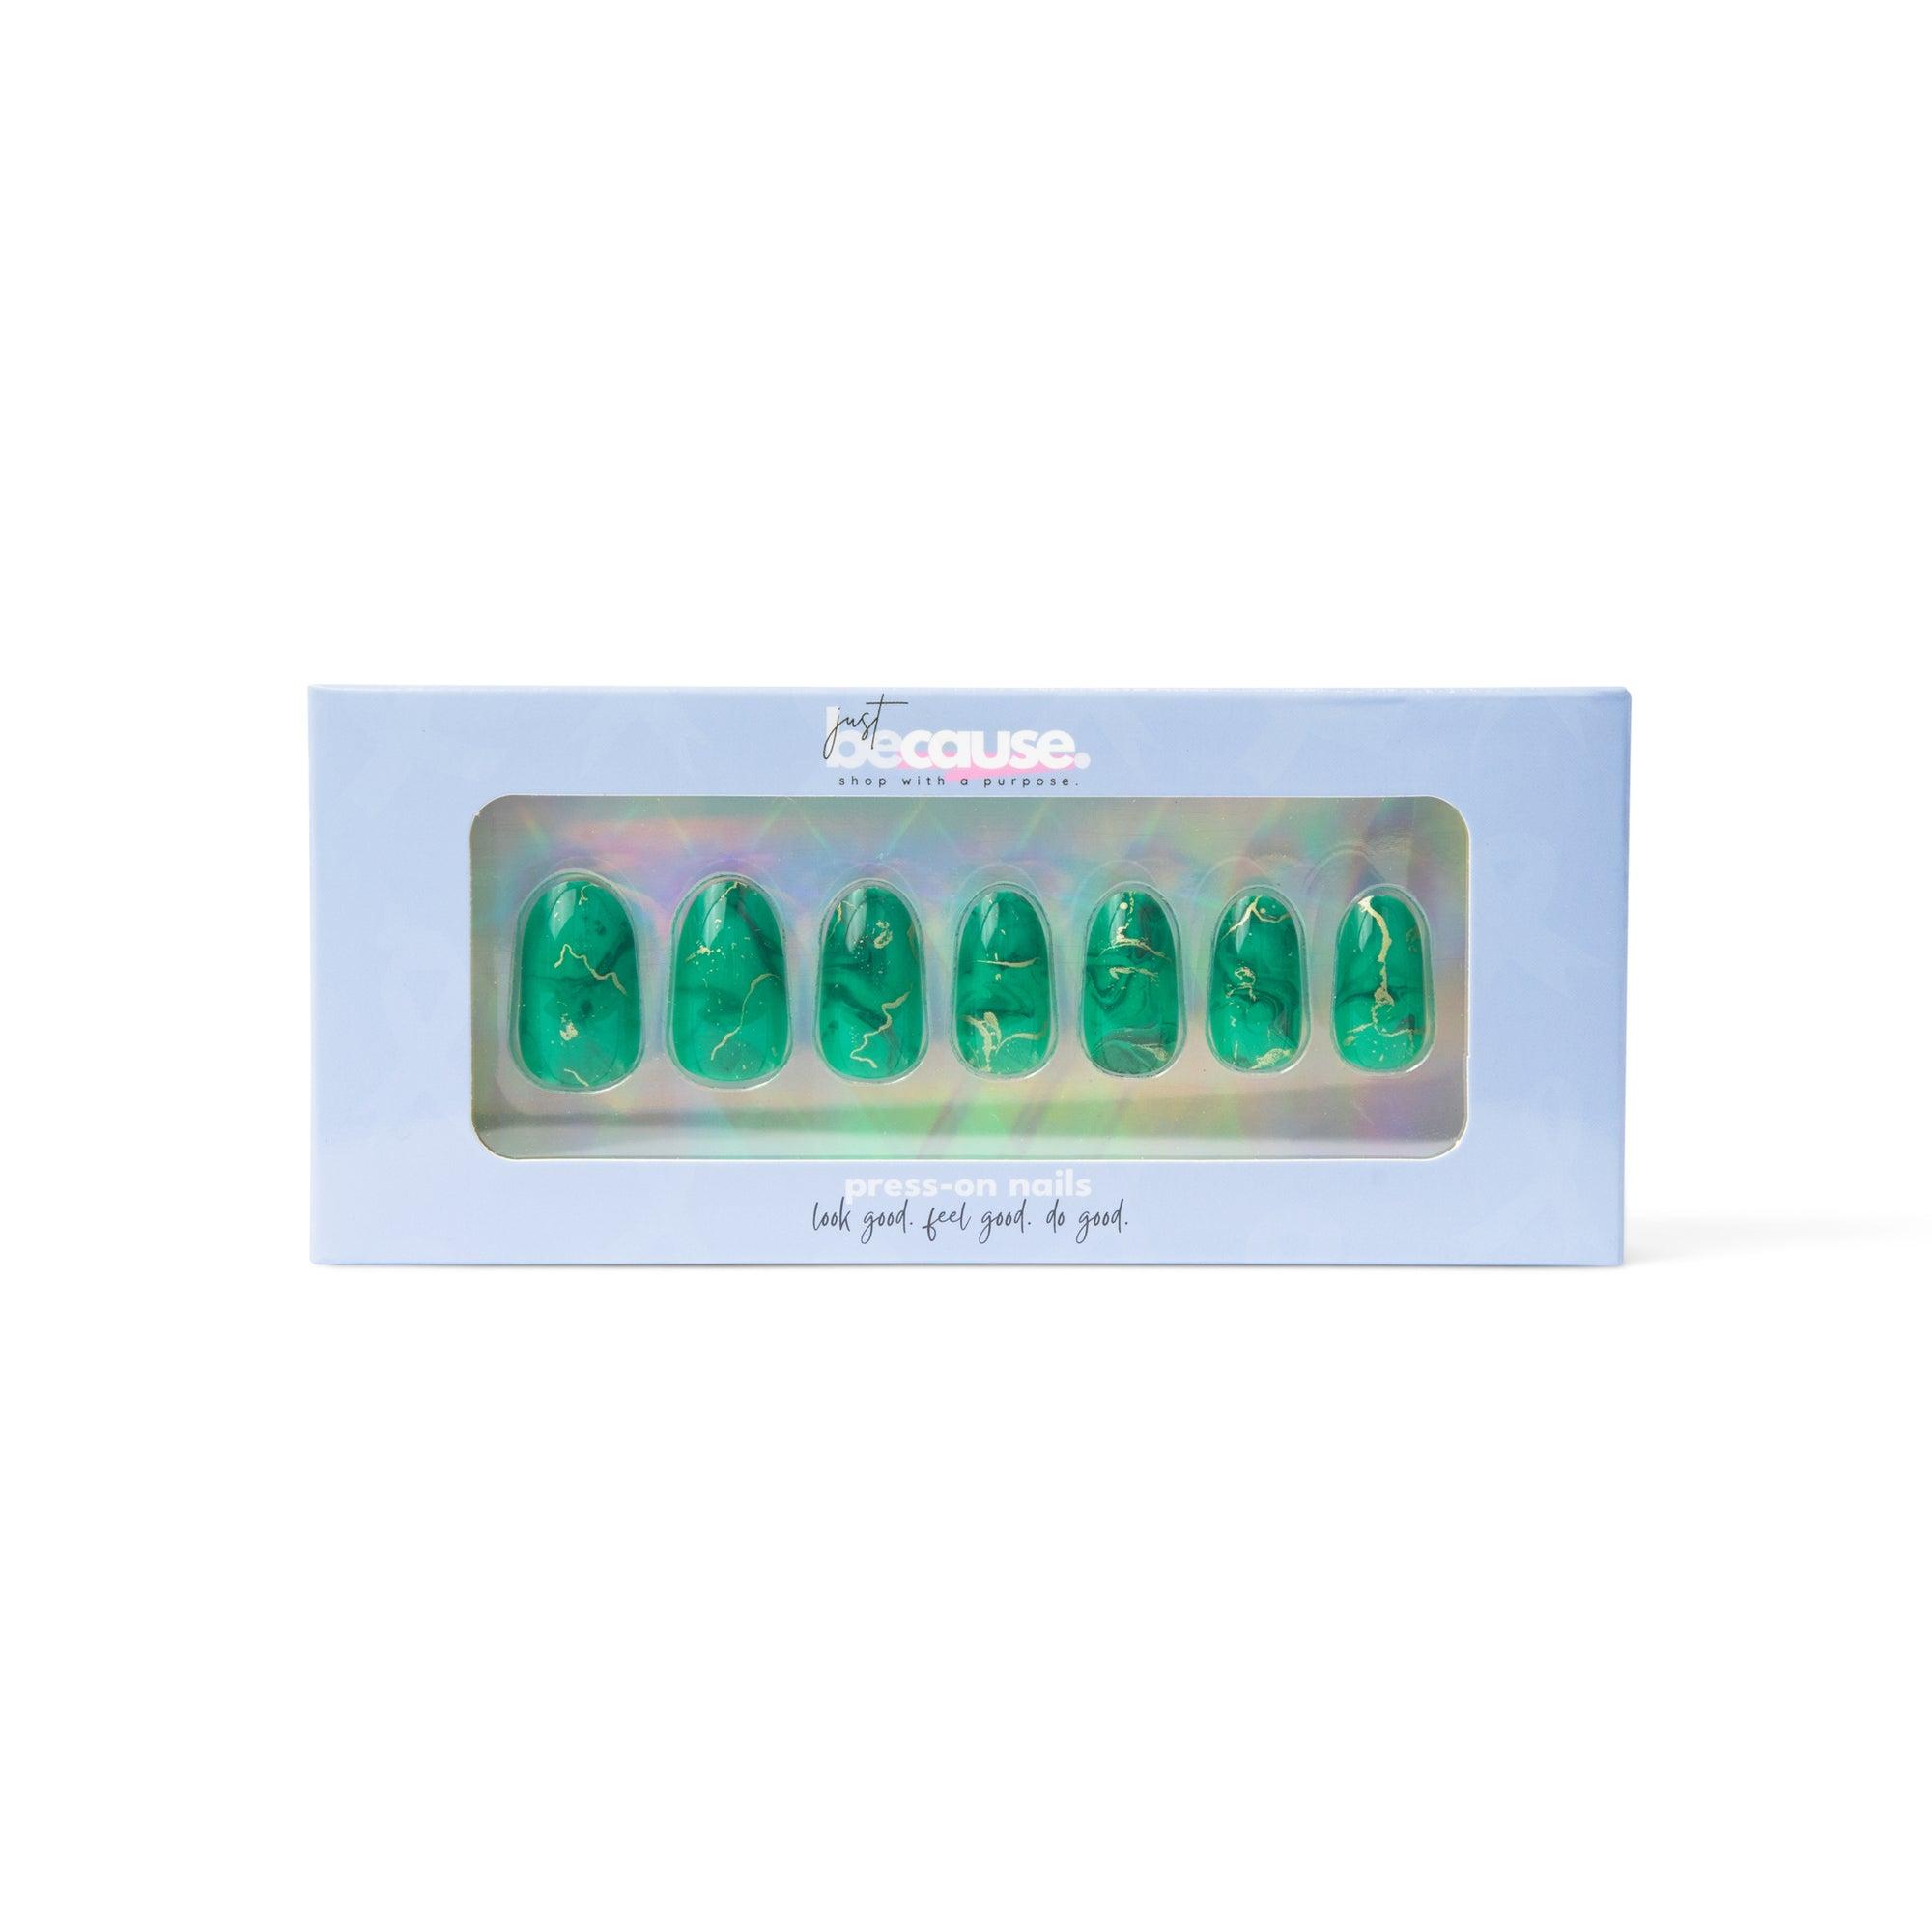 ExpressionMed Just BeCause 24 Pcs ABS Press on nails Medium, Green & Gold Marble Fake Nails, Support T1D - ExpressionMed.com